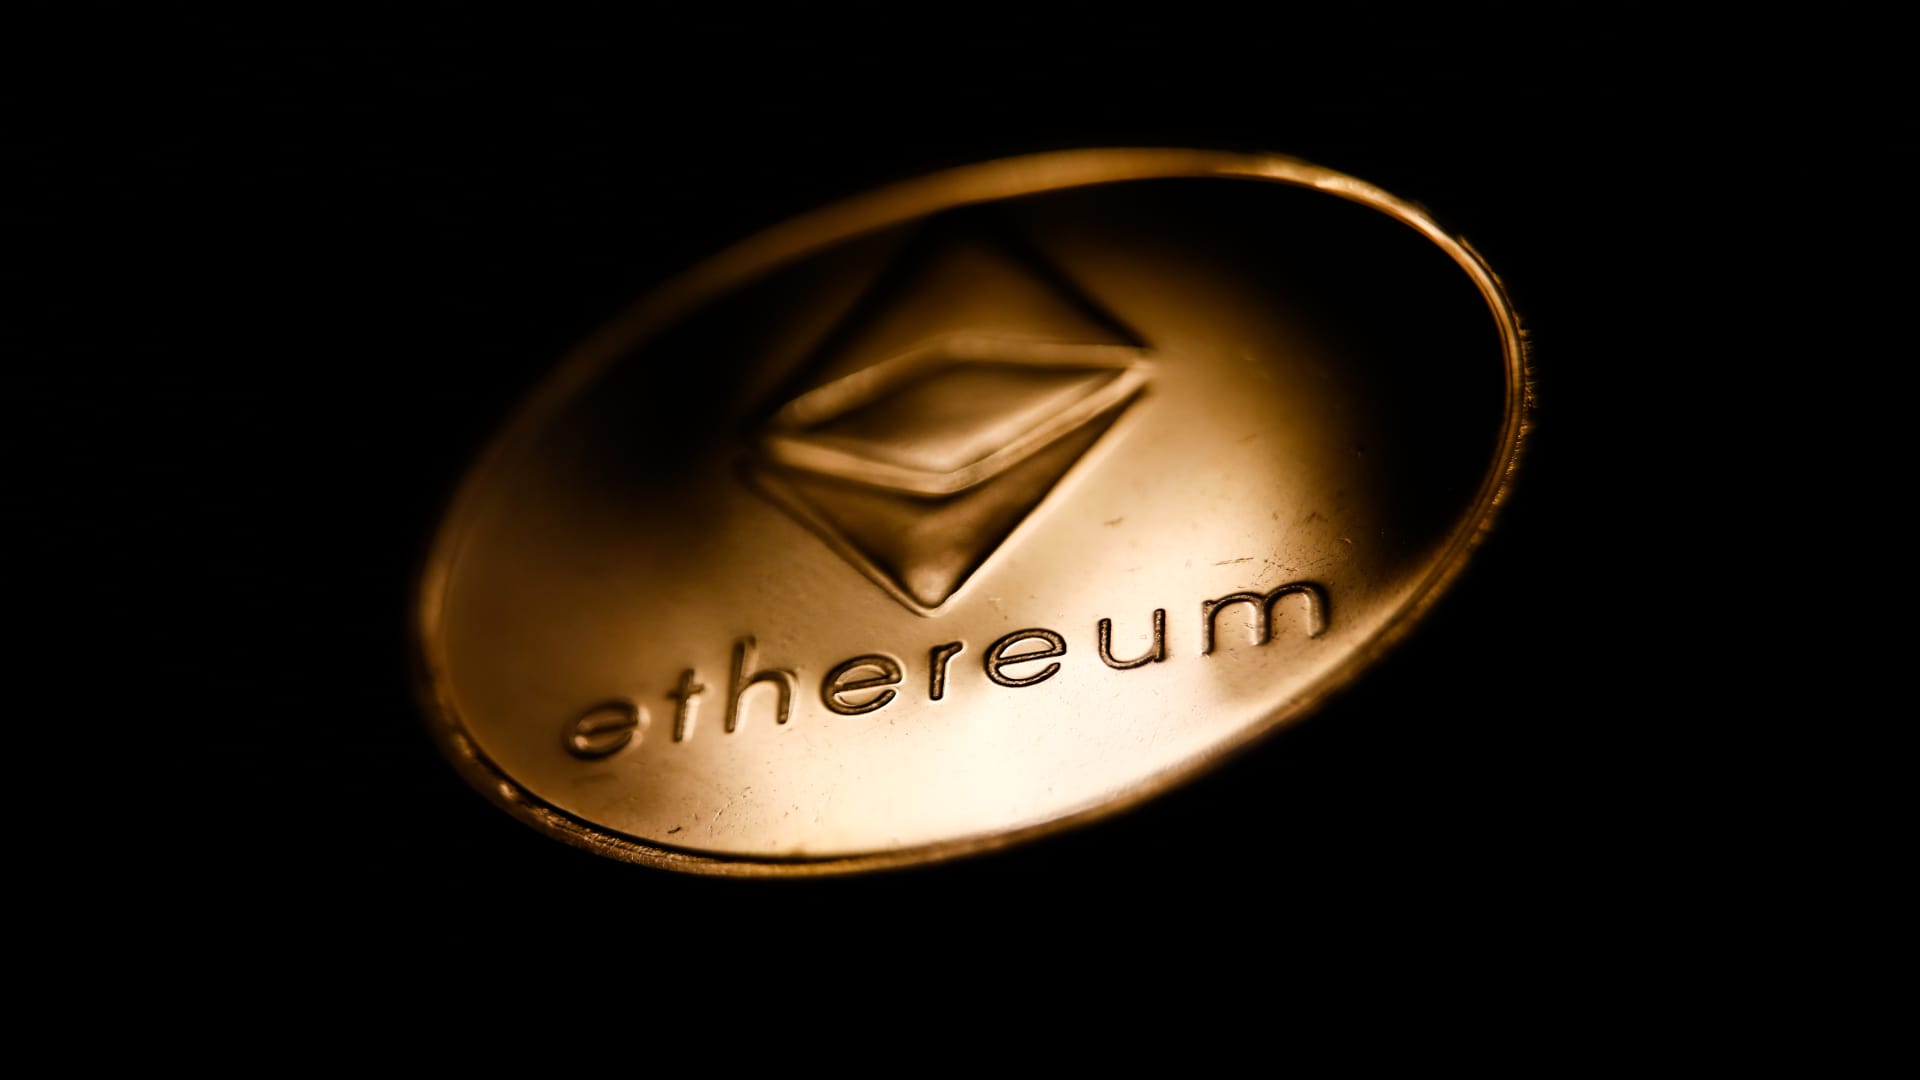 Ethereum just wrapped the final dress rehearsal for one of the most important events in crypto